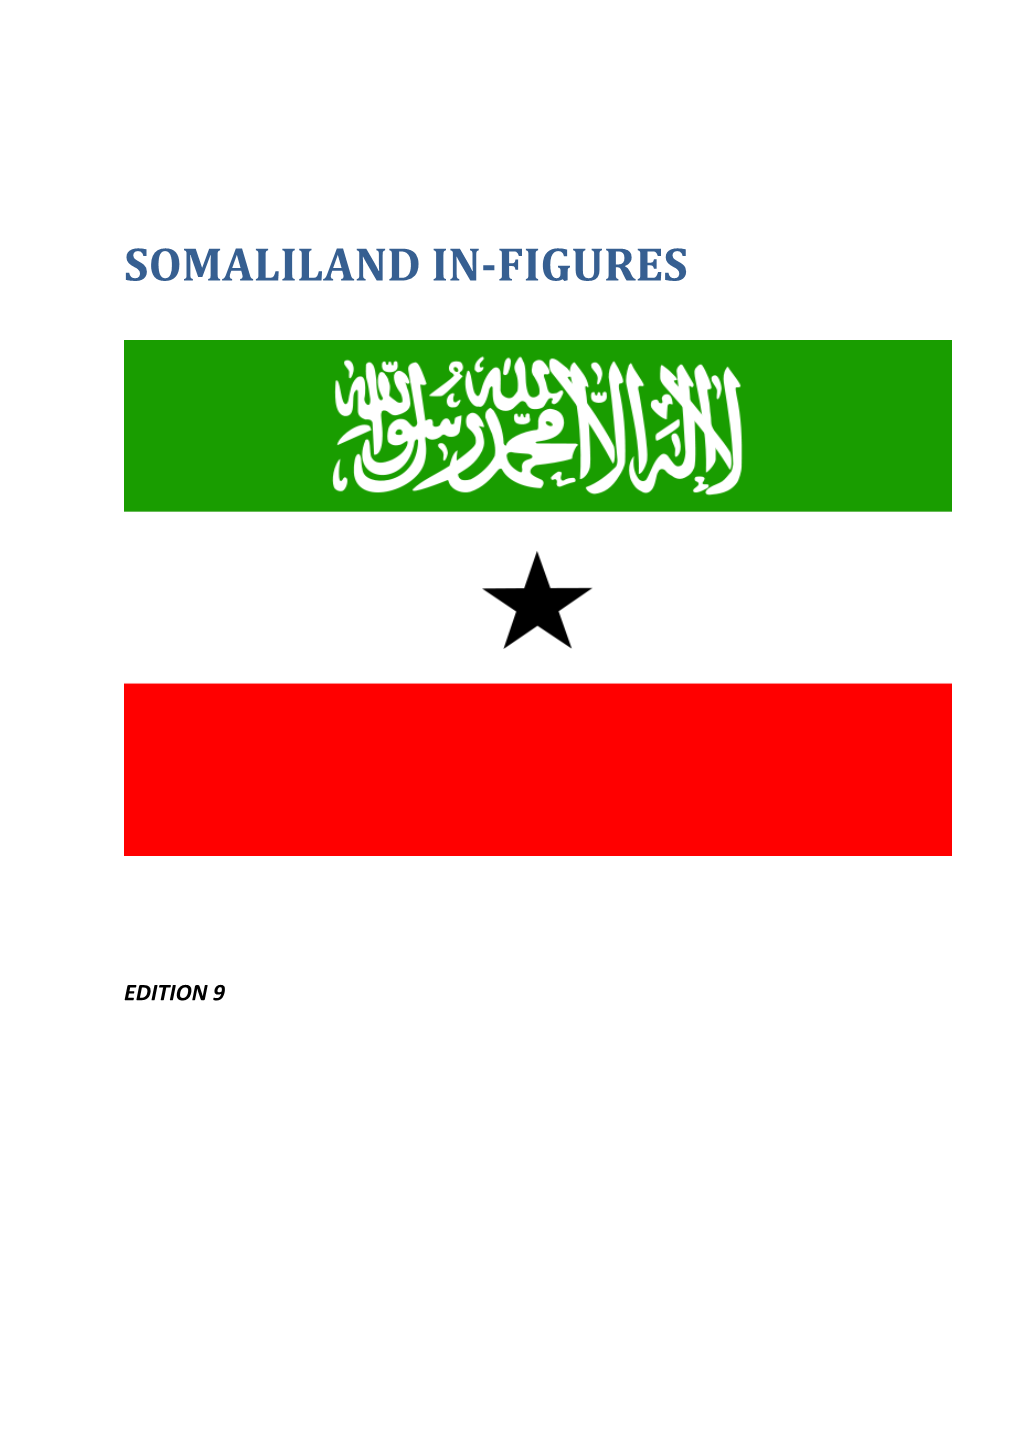 Somaliland In-Figures